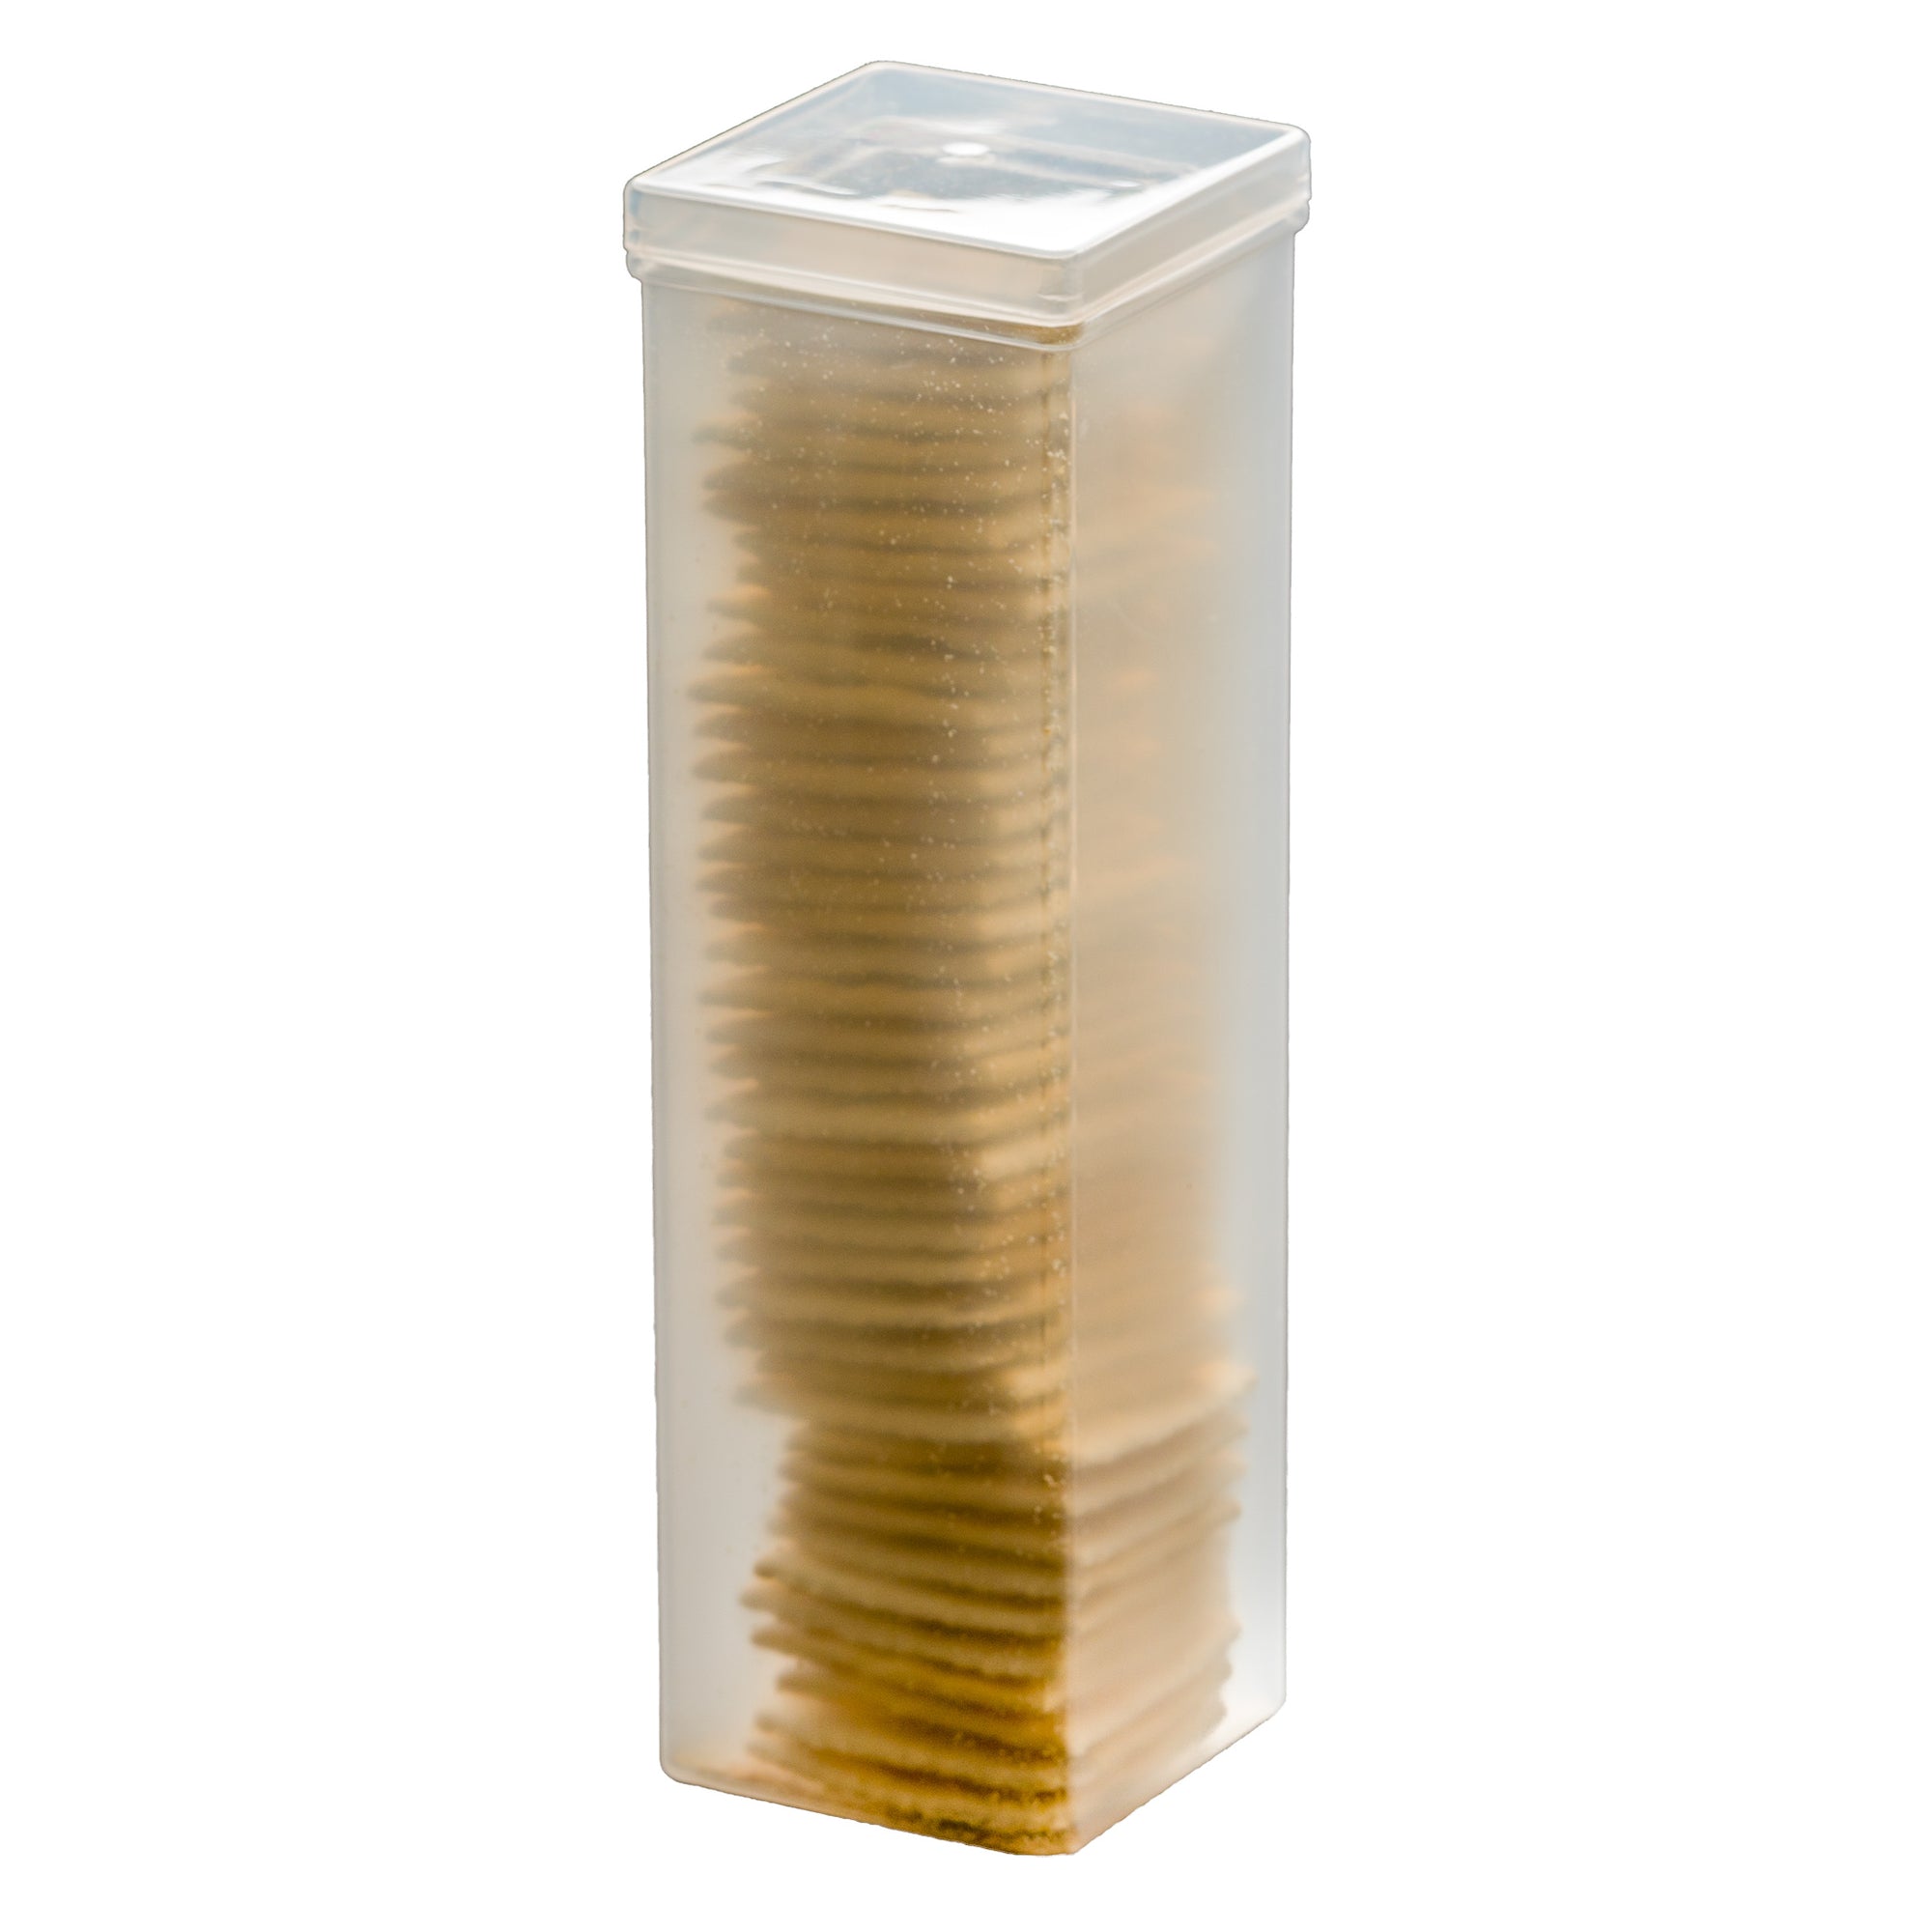 Airtight Cracker Sleeve Storage Containers - Stay Fresh Cracker Keeper,  Cookie Holder - Square Plastic Canister for Saltine Crackers, Kitchen  Pantry